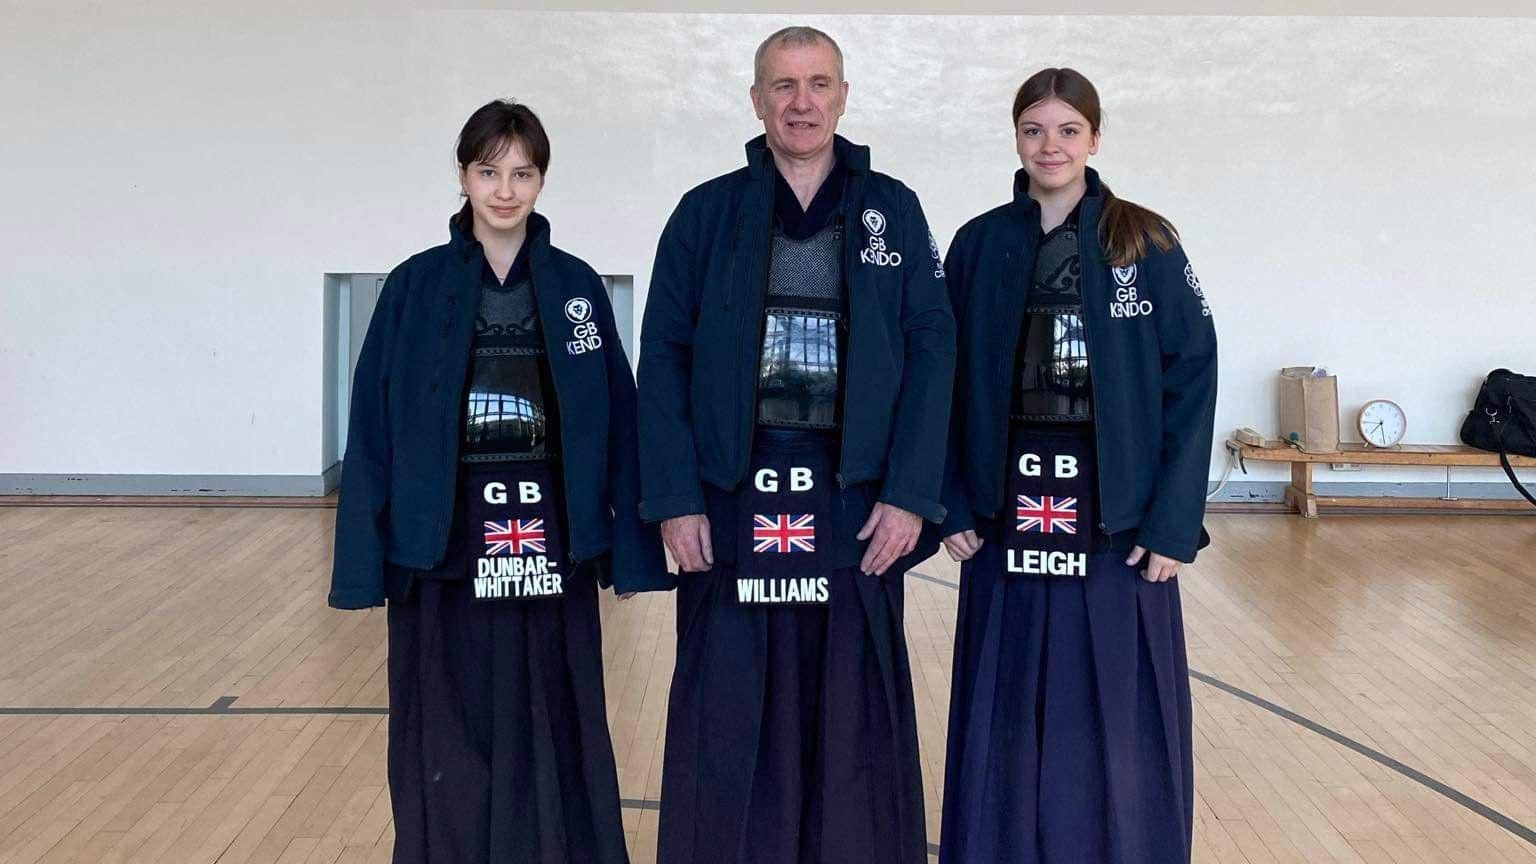 Keira (left), Graham (centre) and Chloe (right) smiling while wearing their Team GB Kendo uniform.